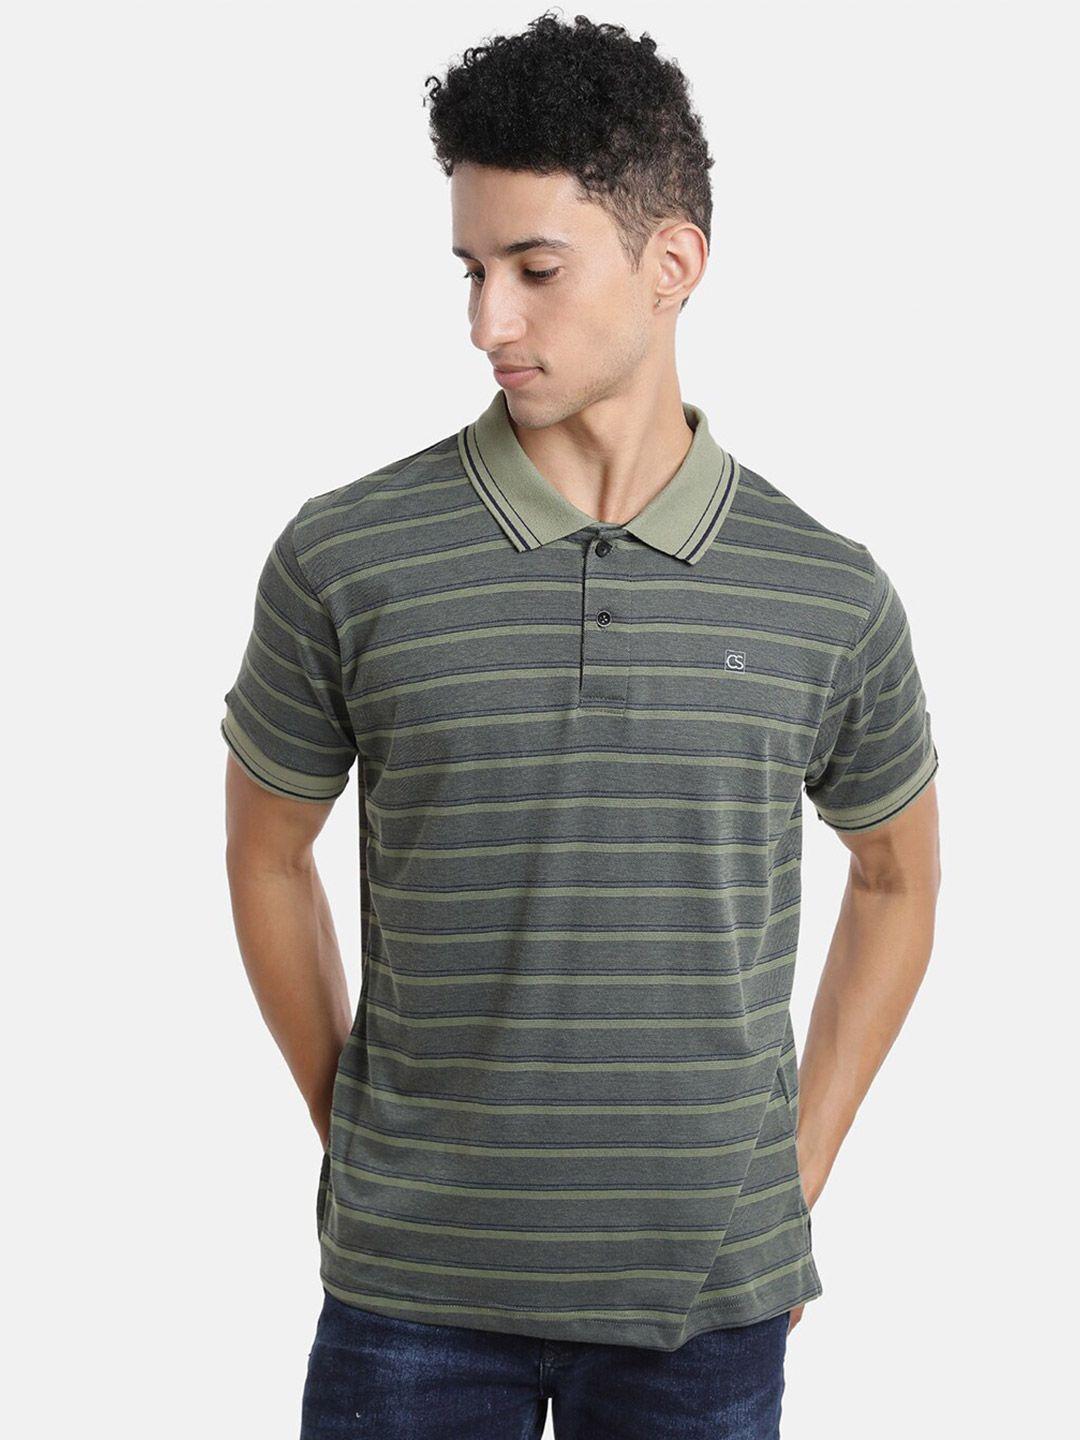 campus sutra men olive green striped henley neck outdoor t-shirt